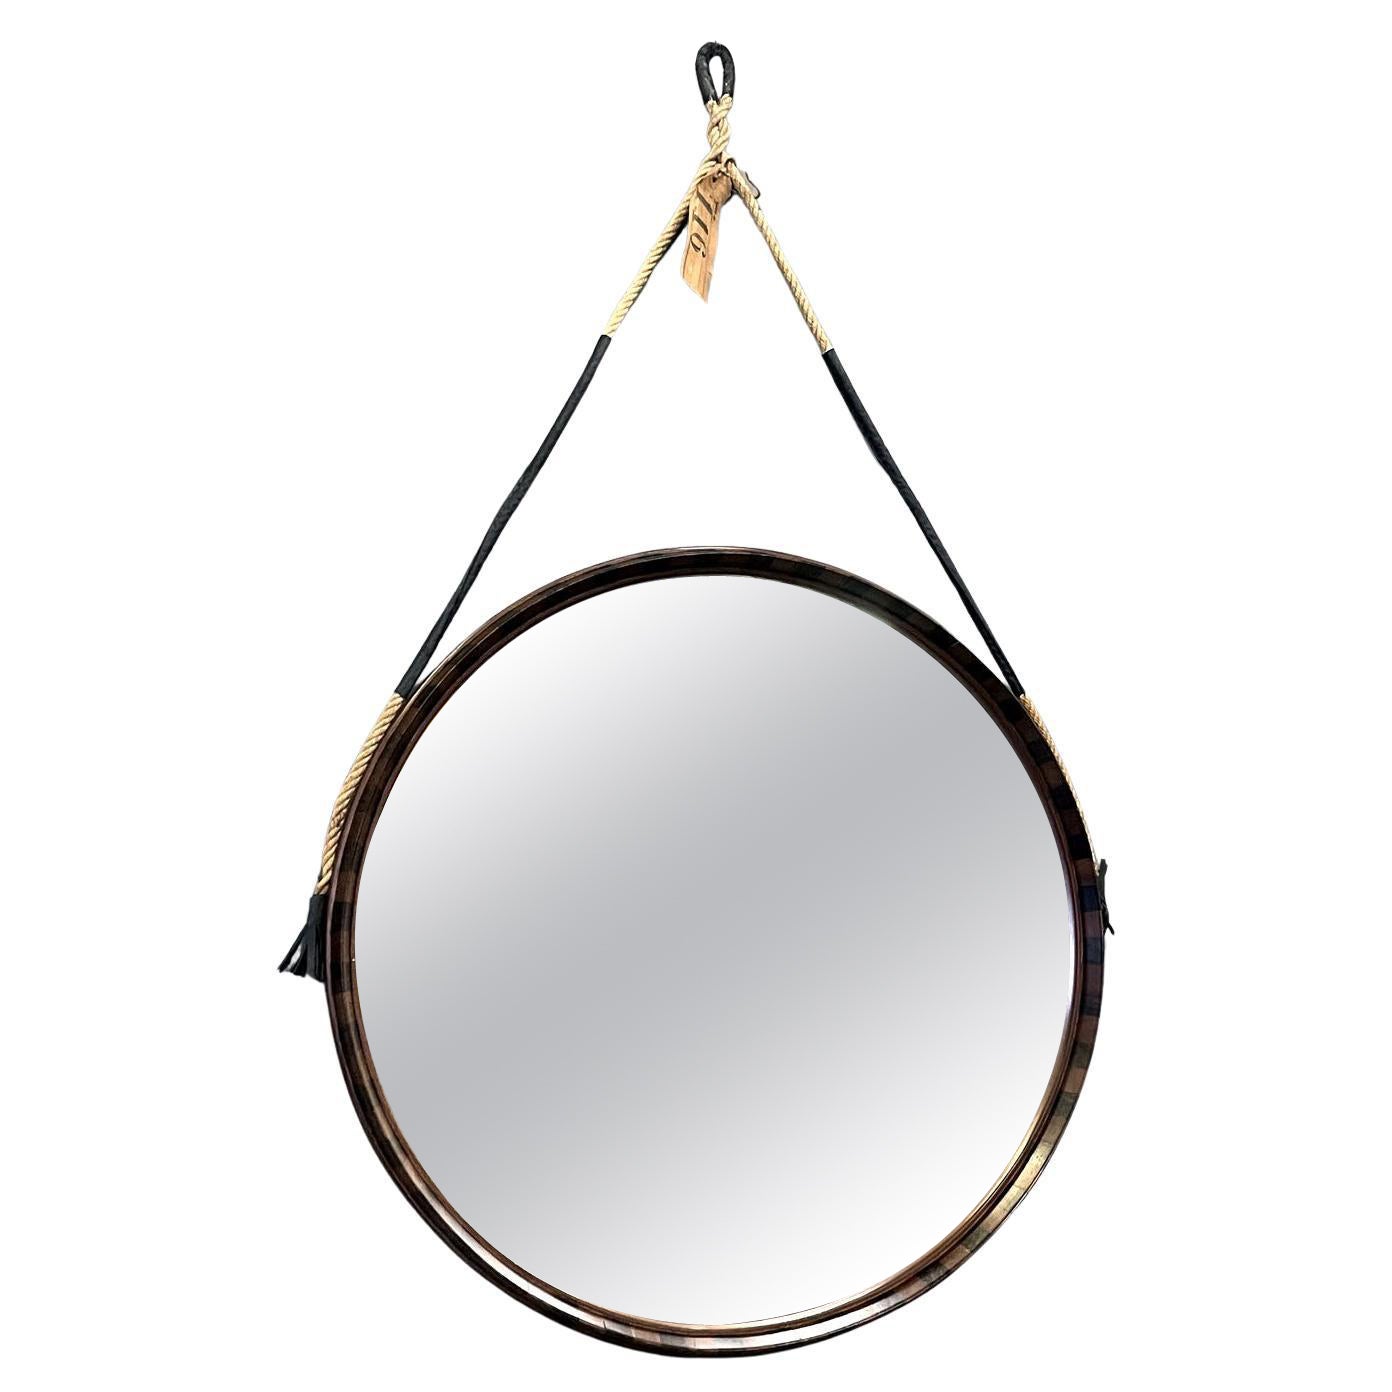 Italian mid-century modern rounded two toned wood wall mirror with rope, 1960s For Sale